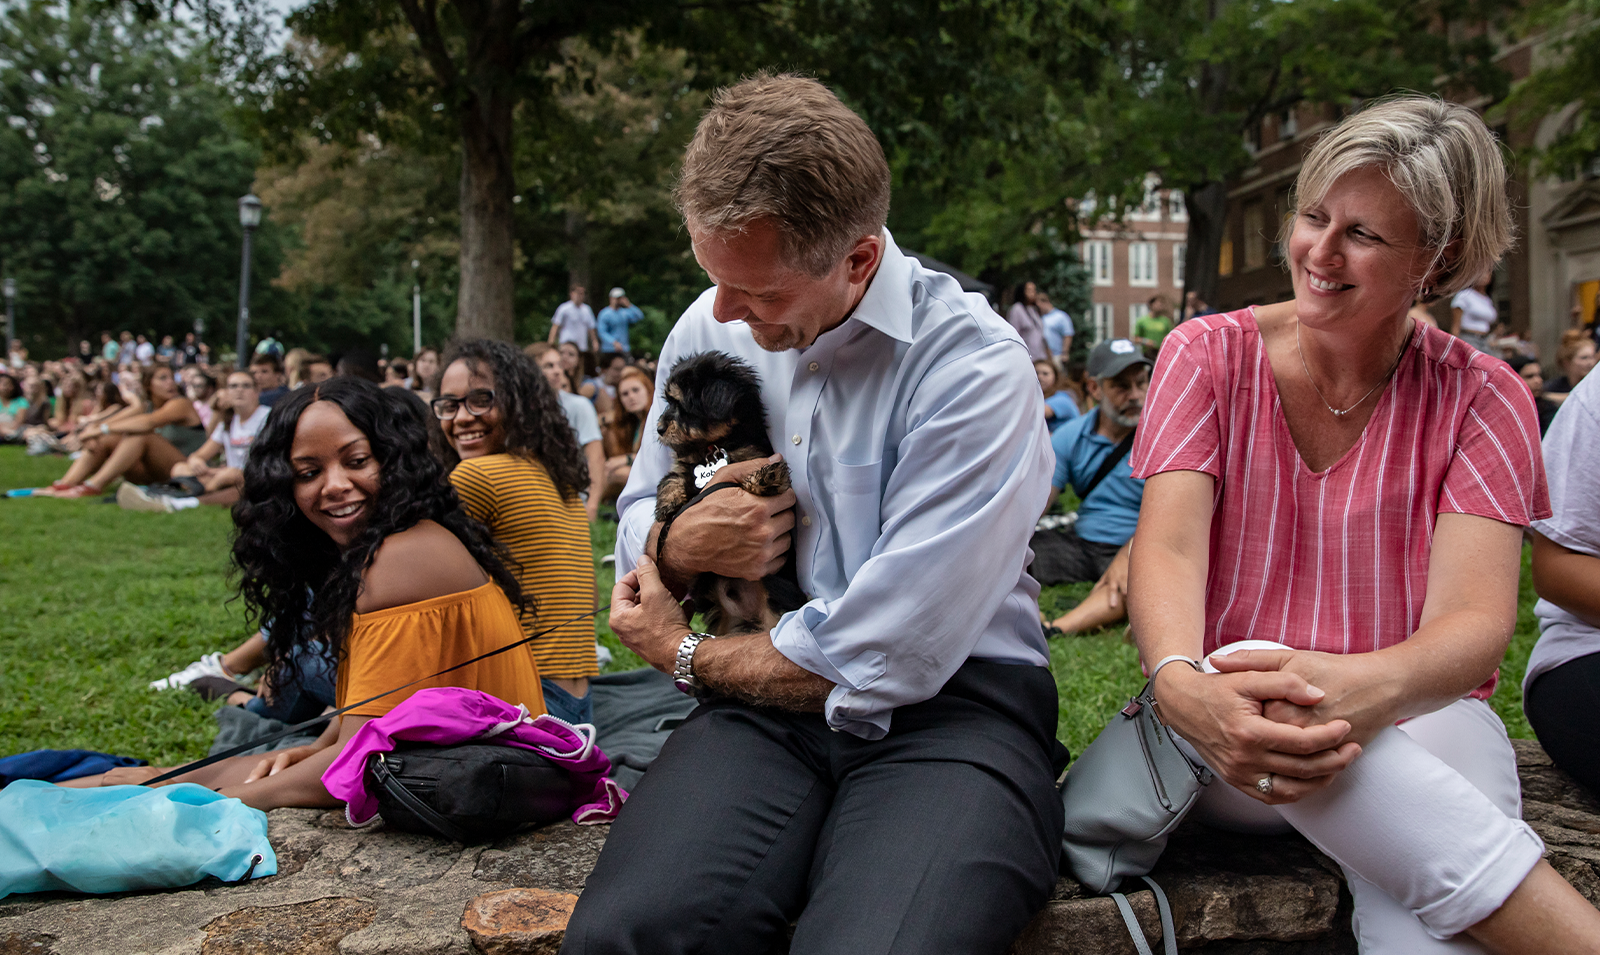 Kevin M. Guskiewicz holding a small dog at the Sunset Serenade event on Polk Place on the campus of UNC-Chapel Hill.